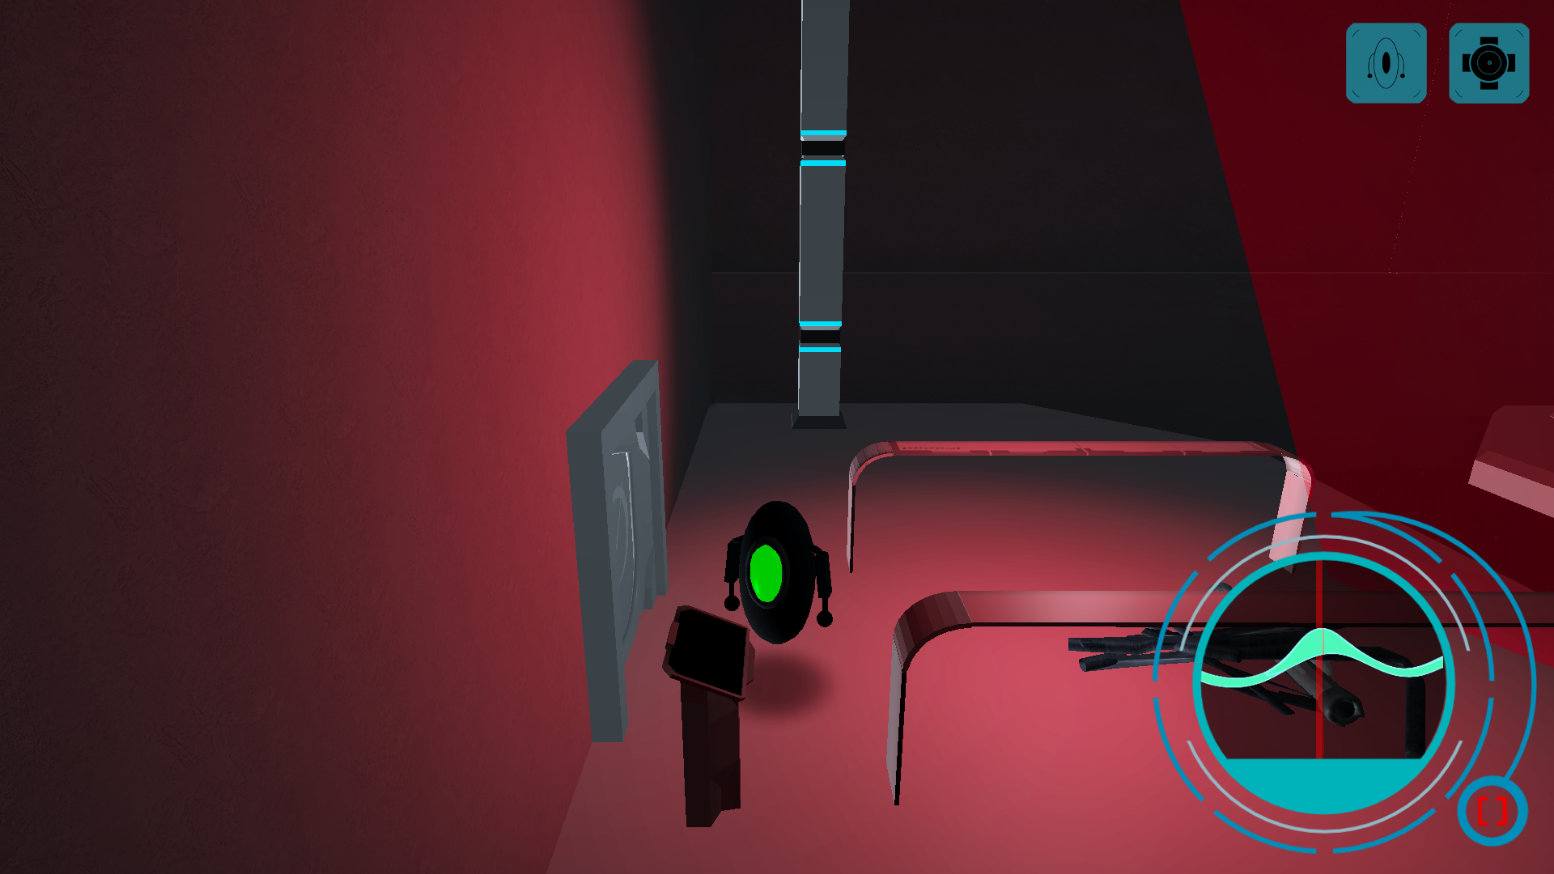 The security door audio puzzle in Outer Cell.